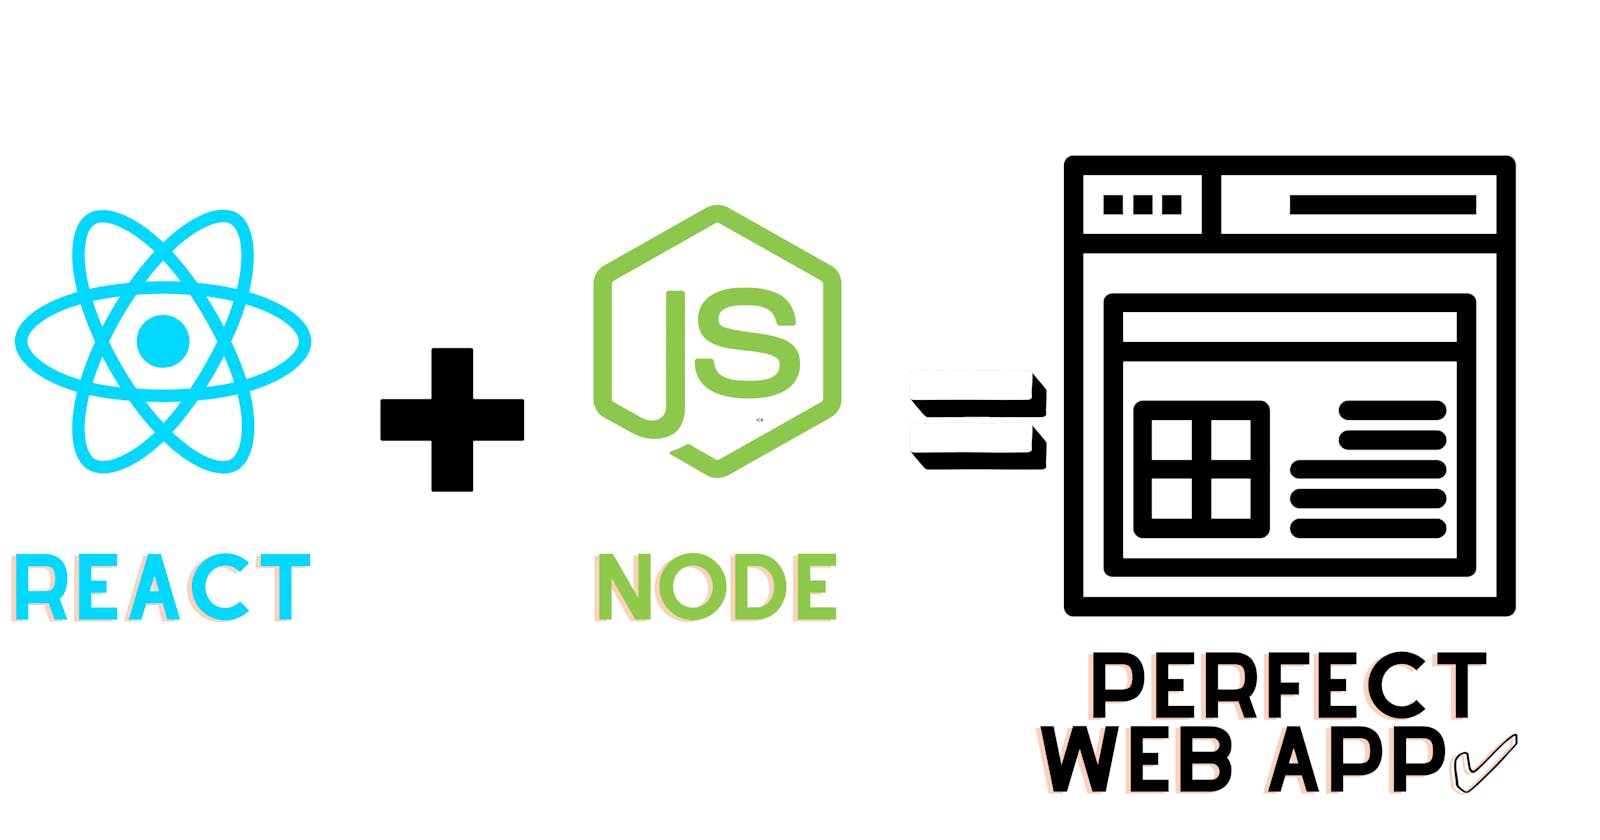 Why React With Node JS to Build Web Applications